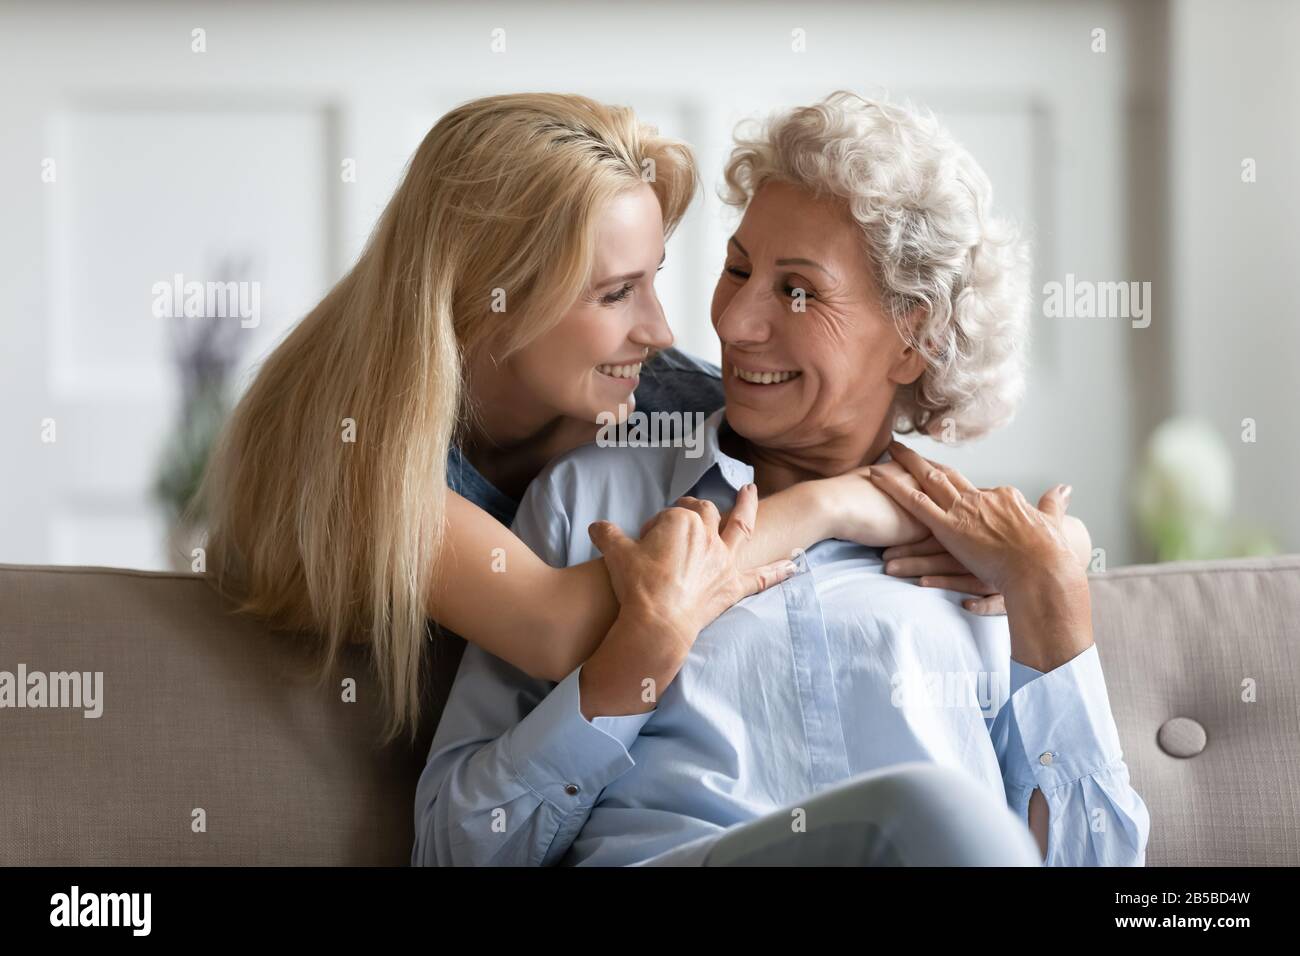 Smiling adult daughter hug mature mom showing love Stock Photo